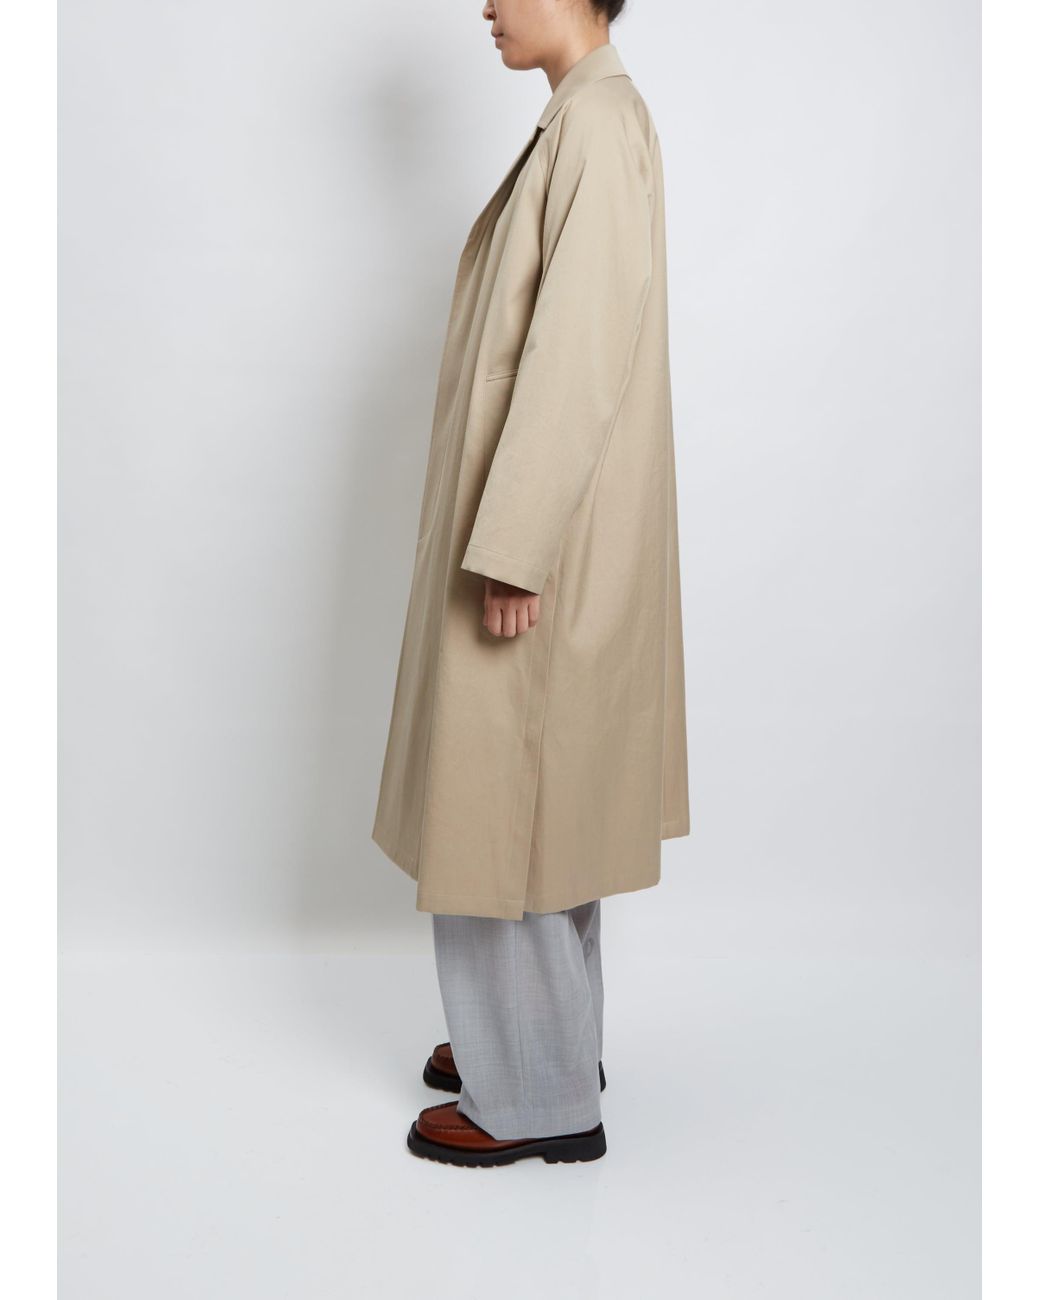 AURALEE Twill Trench Coat in Natural   Lyst